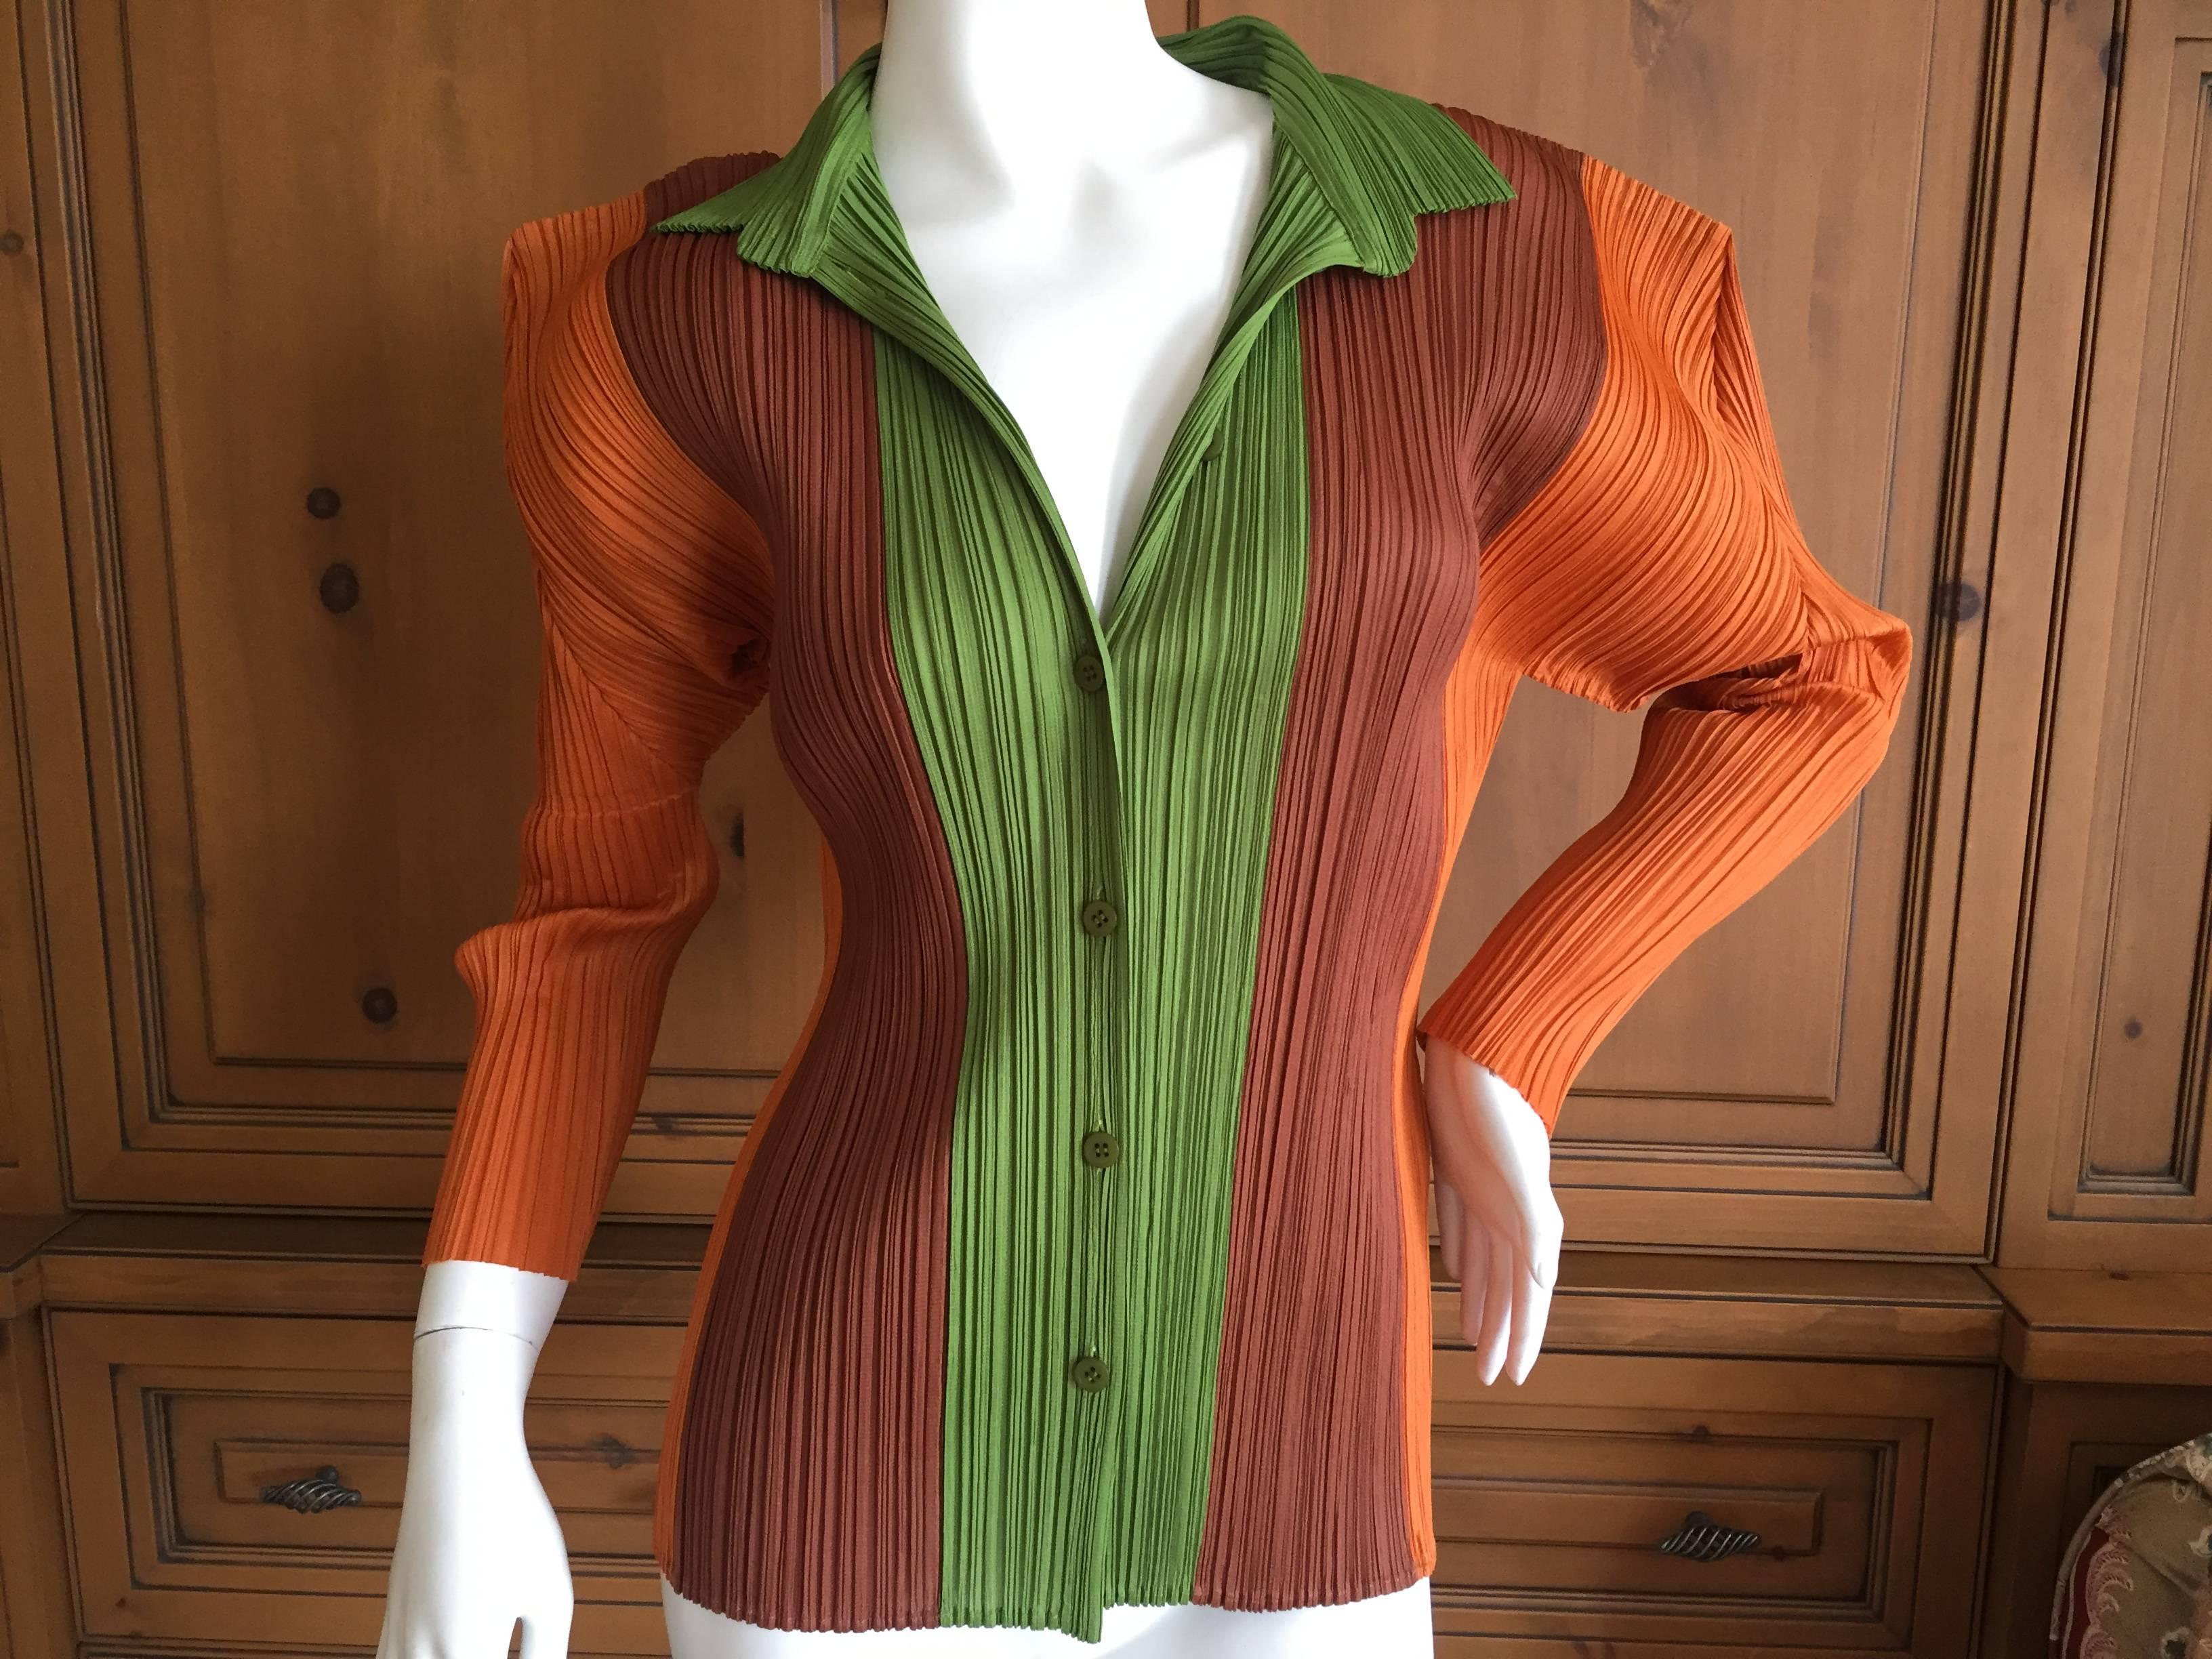 Issey Miyake Pleats Please Rare Vintage Color Block Jacket.
Button front, size 5.
There is a lot of stretch in the pleated fabric.
Bust 38